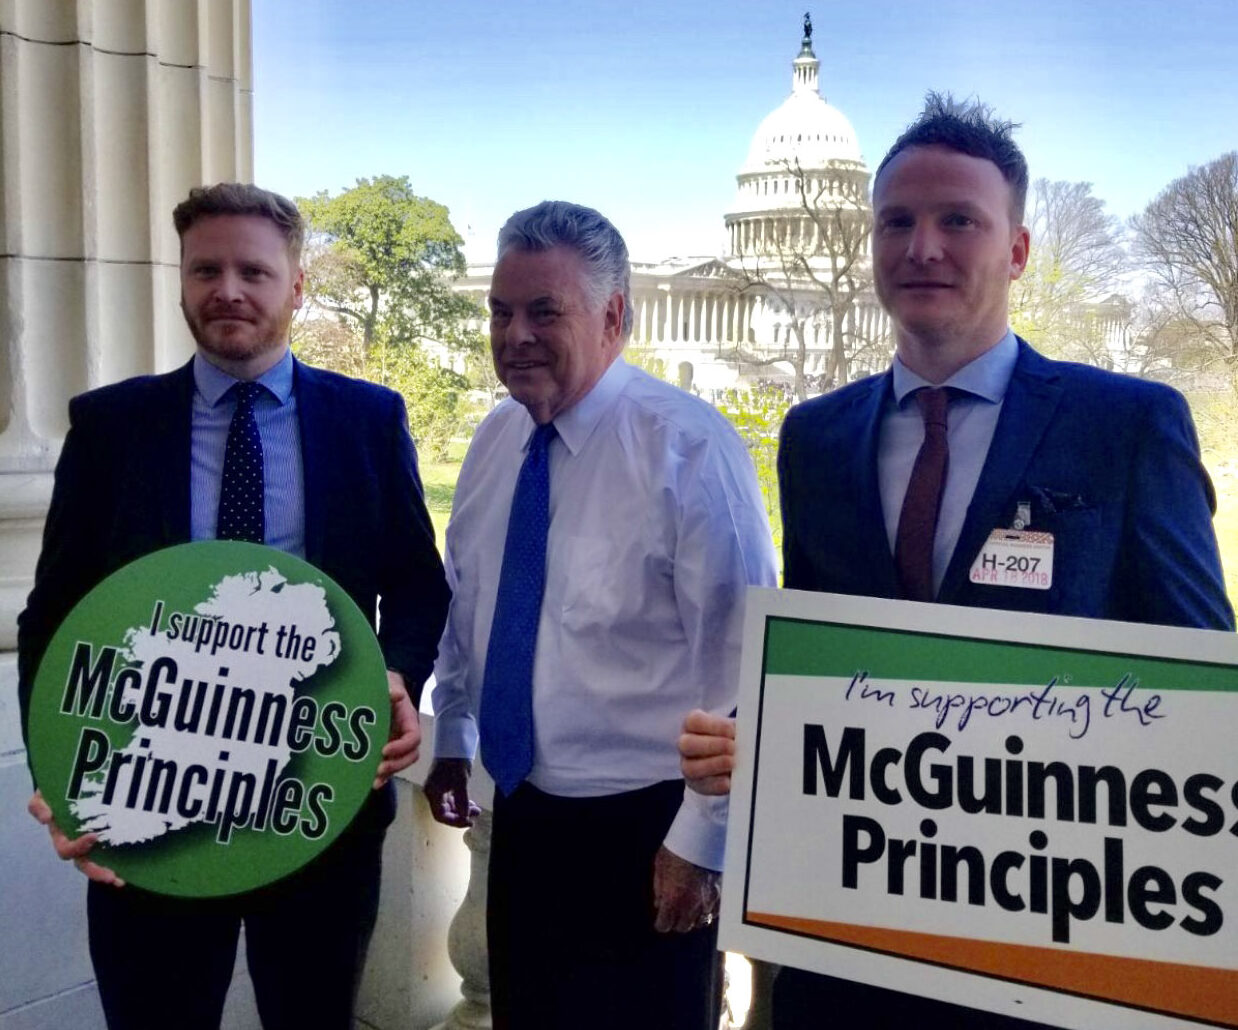 Promoting the McGuinness Principles in the US